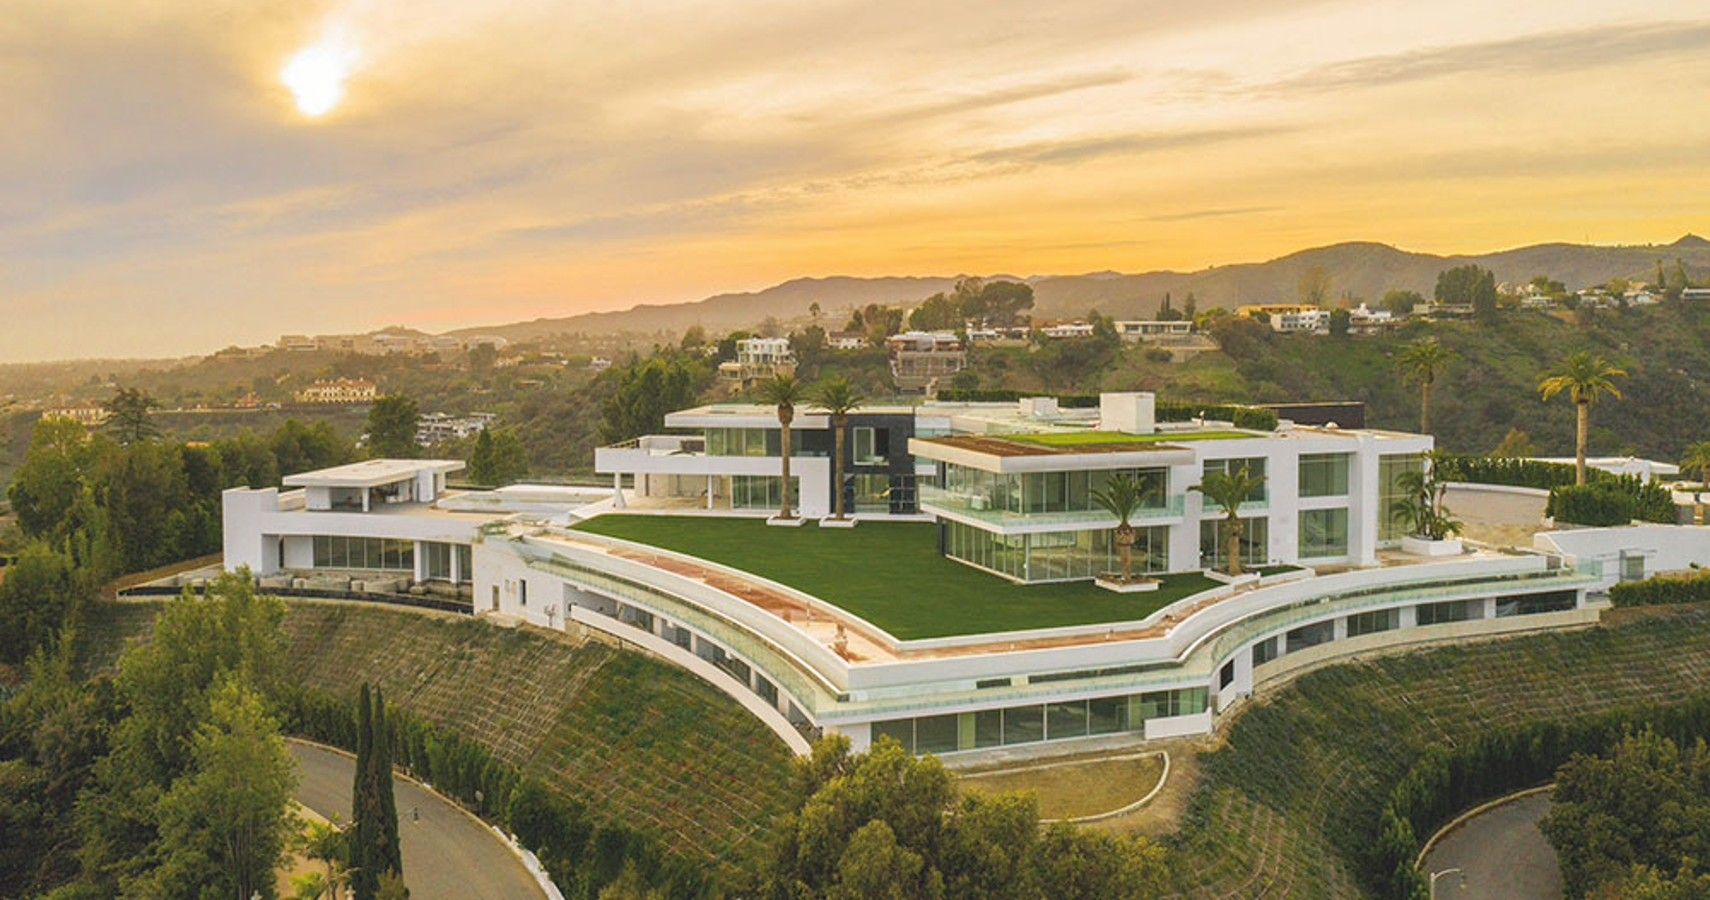 America's Most Expensive Home Up For Auction After Fails To Sell For